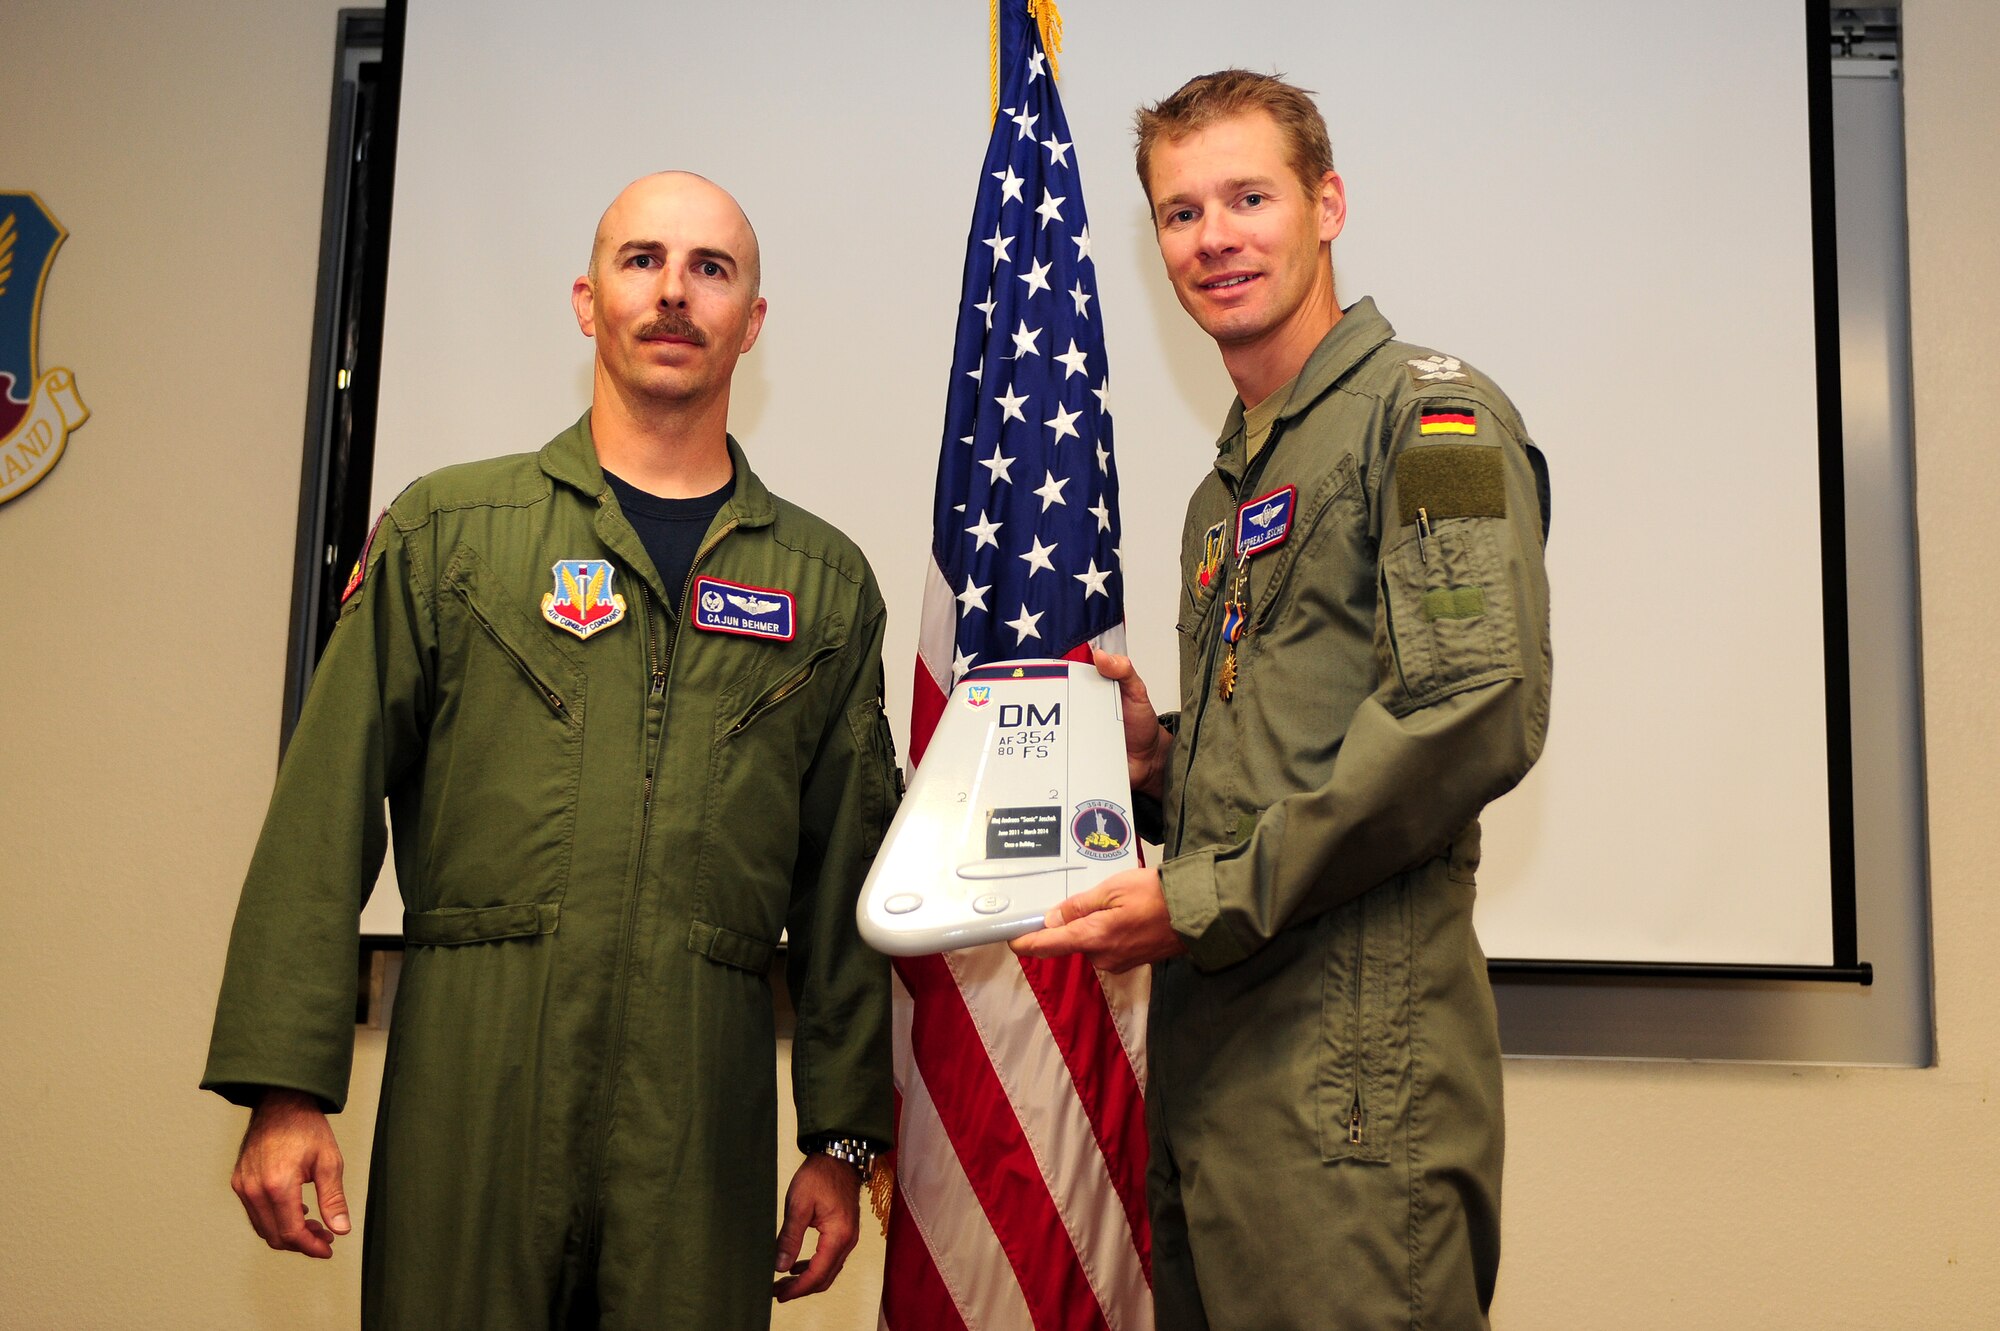 German Maj. Andreas Jeschek, 354th Fighter Squadron assistant director of operations, receives the U.S. Air Medal with three oak leaf clusters at Davis-Monthan Air Force Base, Ariz., March 21, 2014. Jeschek is the first German pilot to fly in combat since World War II. (U.S. Air Force photo by Senior Airman Camilla Elizeu/Released)